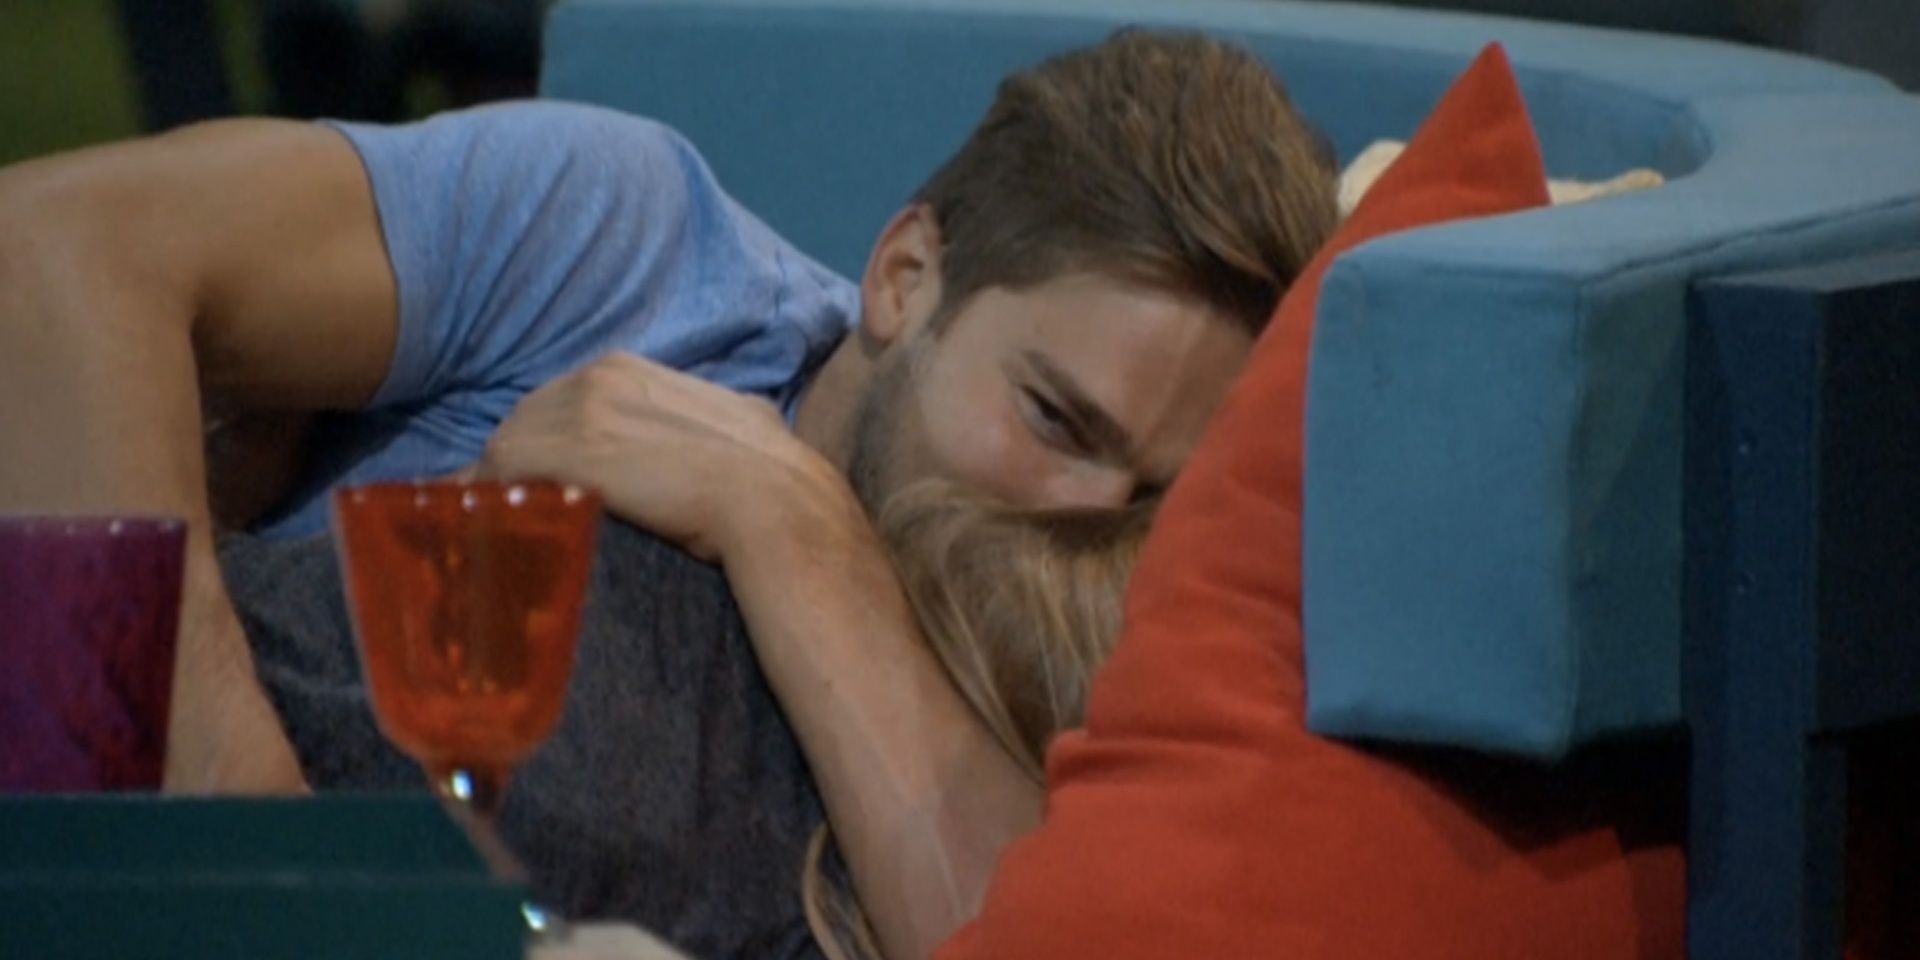 Clay kissing Shelli on Big Brother on the sofa.